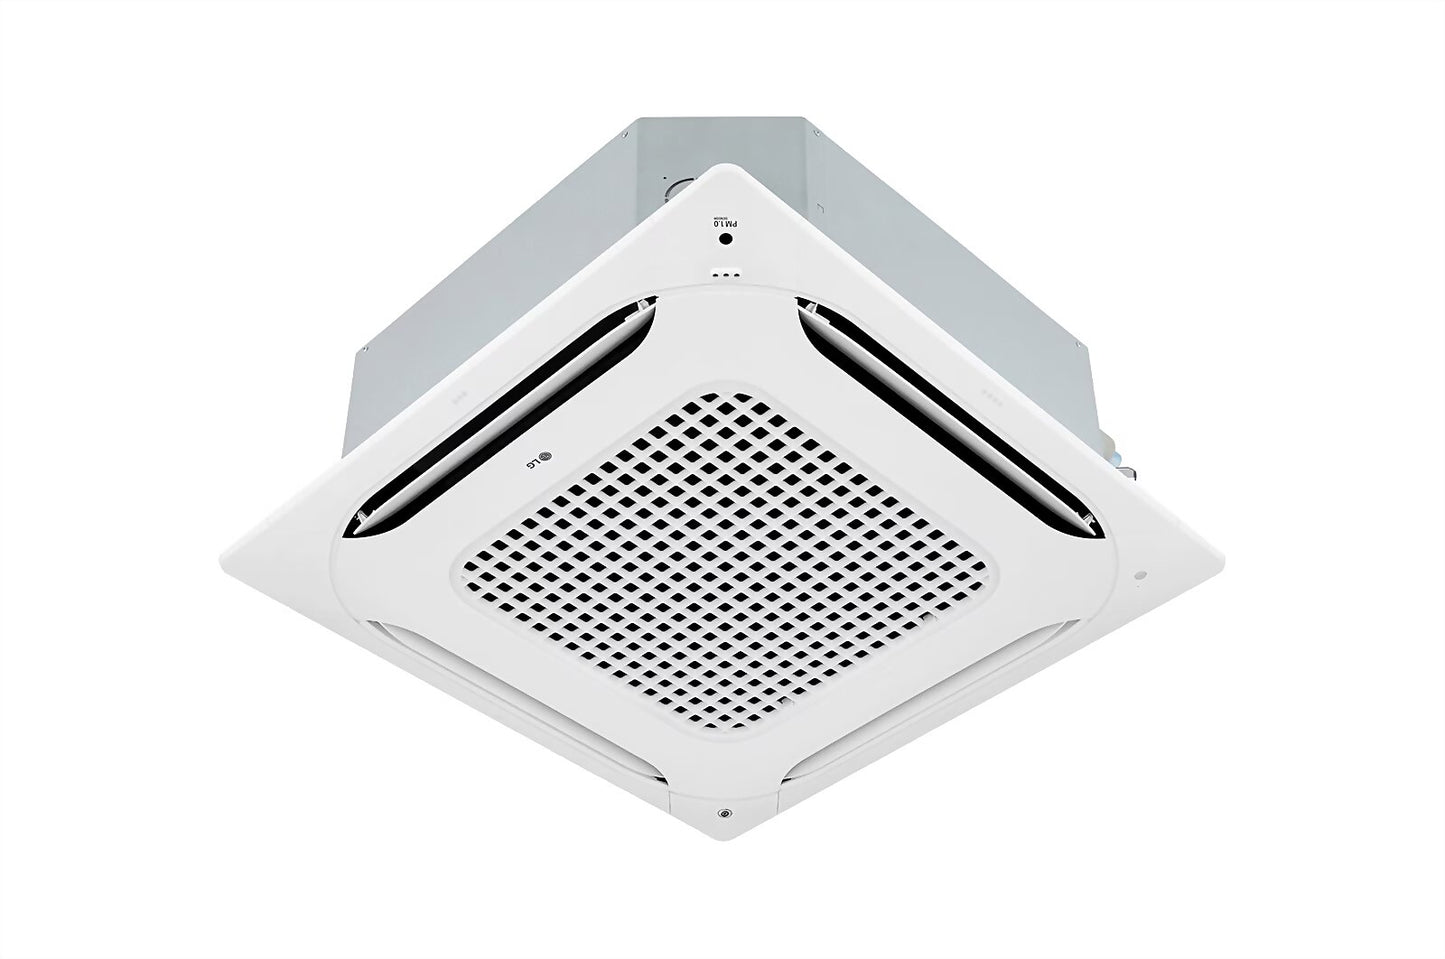 LG Ceiling Mounted 4 Way Cassette Inverter AC 14.1KW with Advanced Air Purification and Independent Vane Control - ARNU48GTAB4